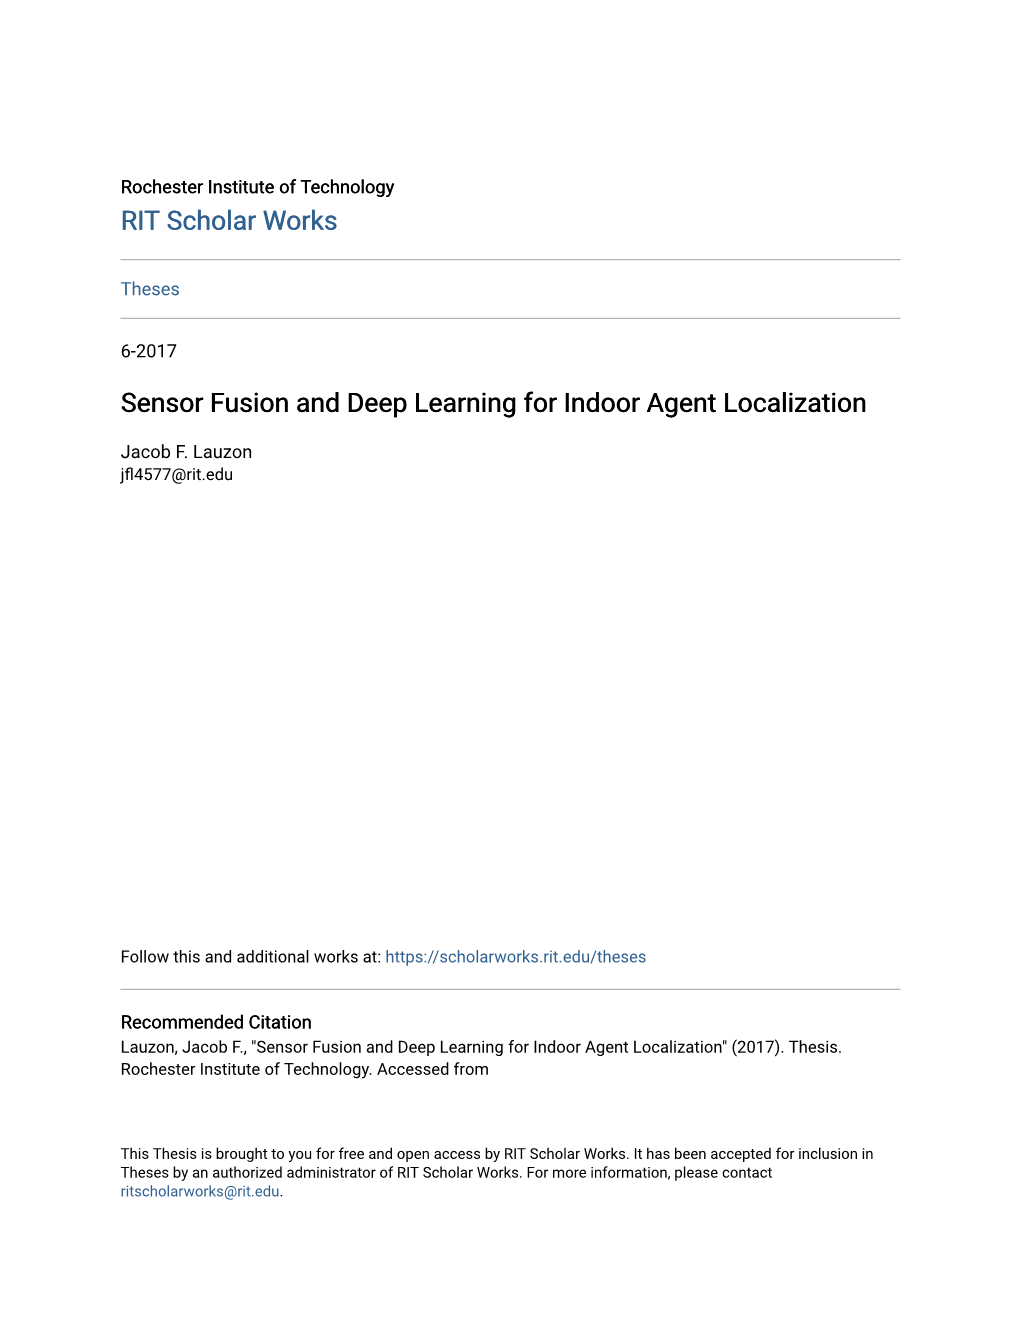 Sensor Fusion and Deep Learning for Indoor Agent Localization